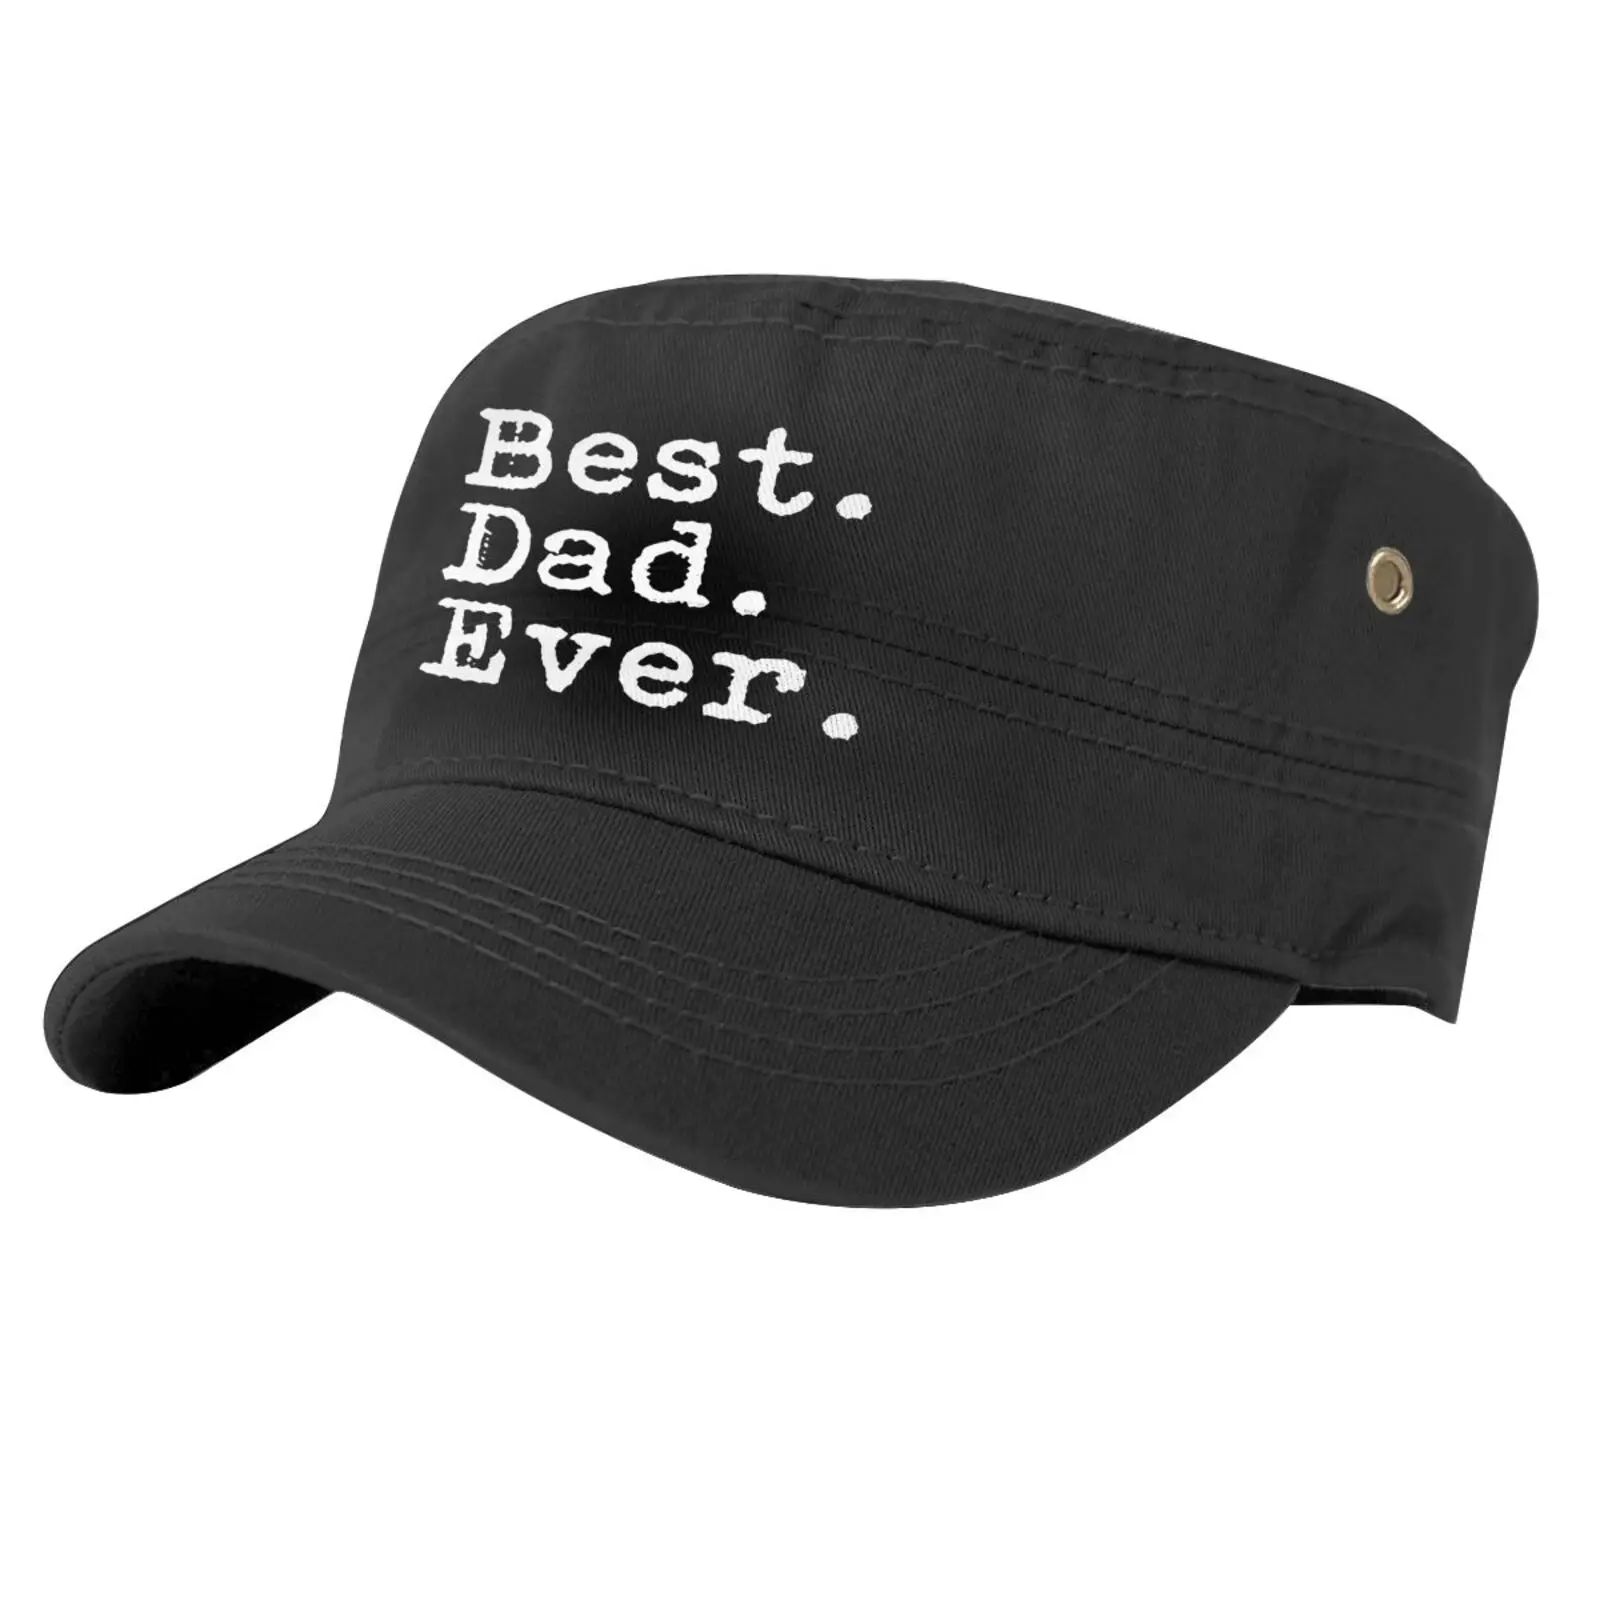 

Best Dad Ever Fathers Day Papa Cap Women's Hat Men's Stylish Caps Wool Beanie Balaclava Cowgirl Summer Hat Cowgirl Cowboy Hats